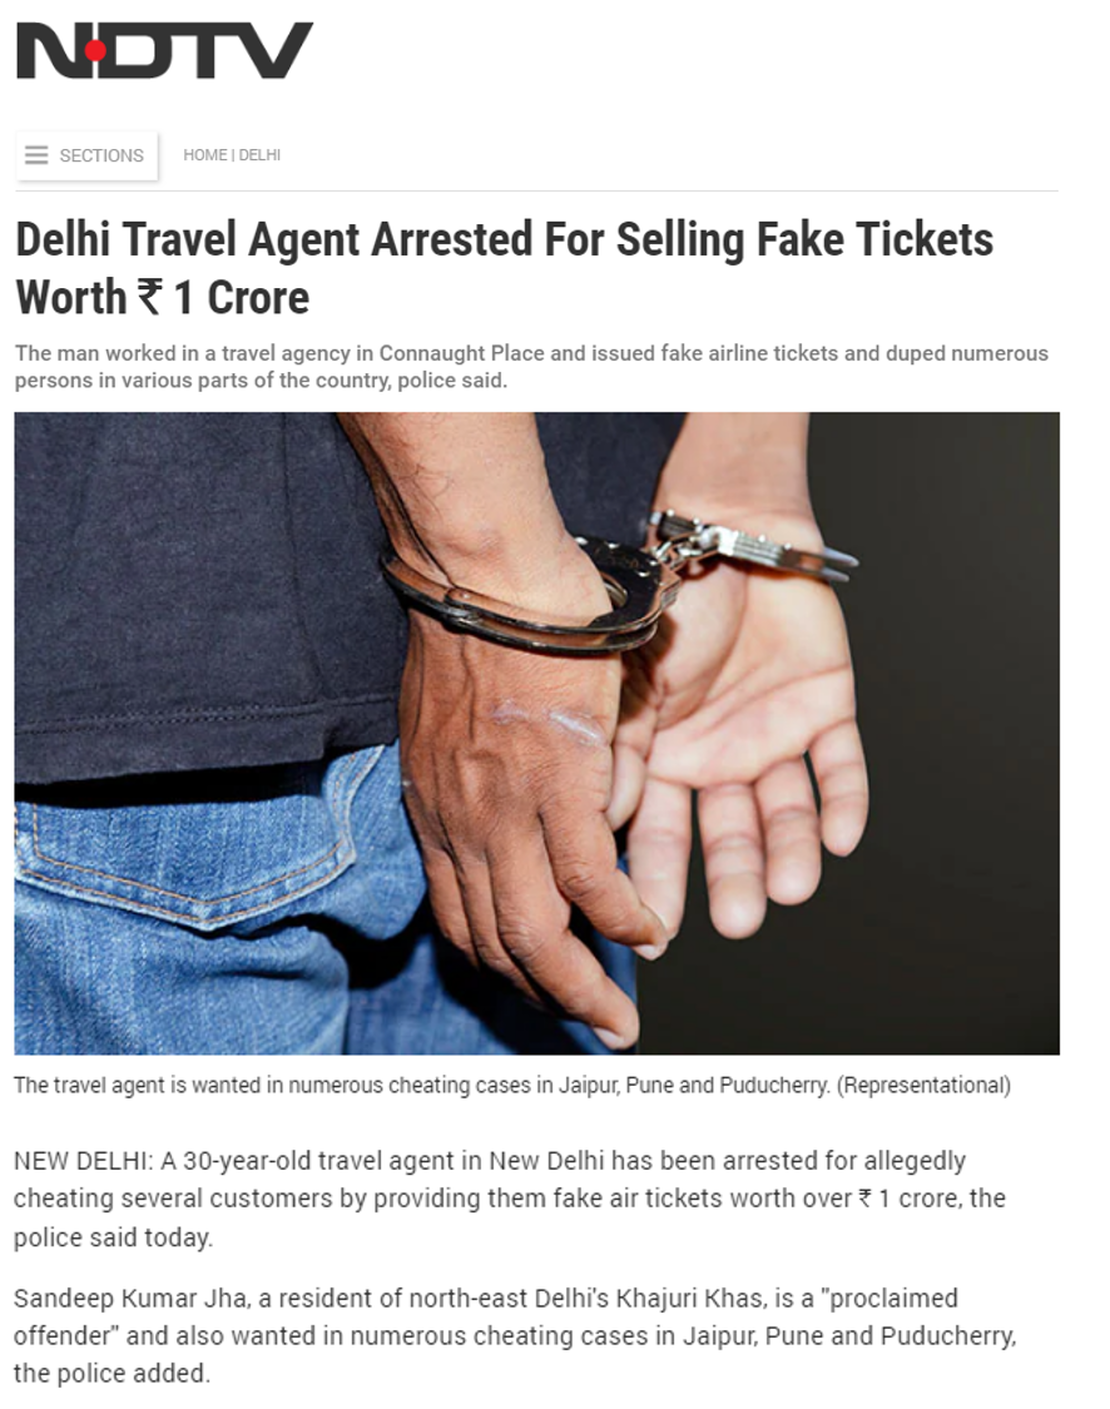 How can you stop fake ticket rackets?